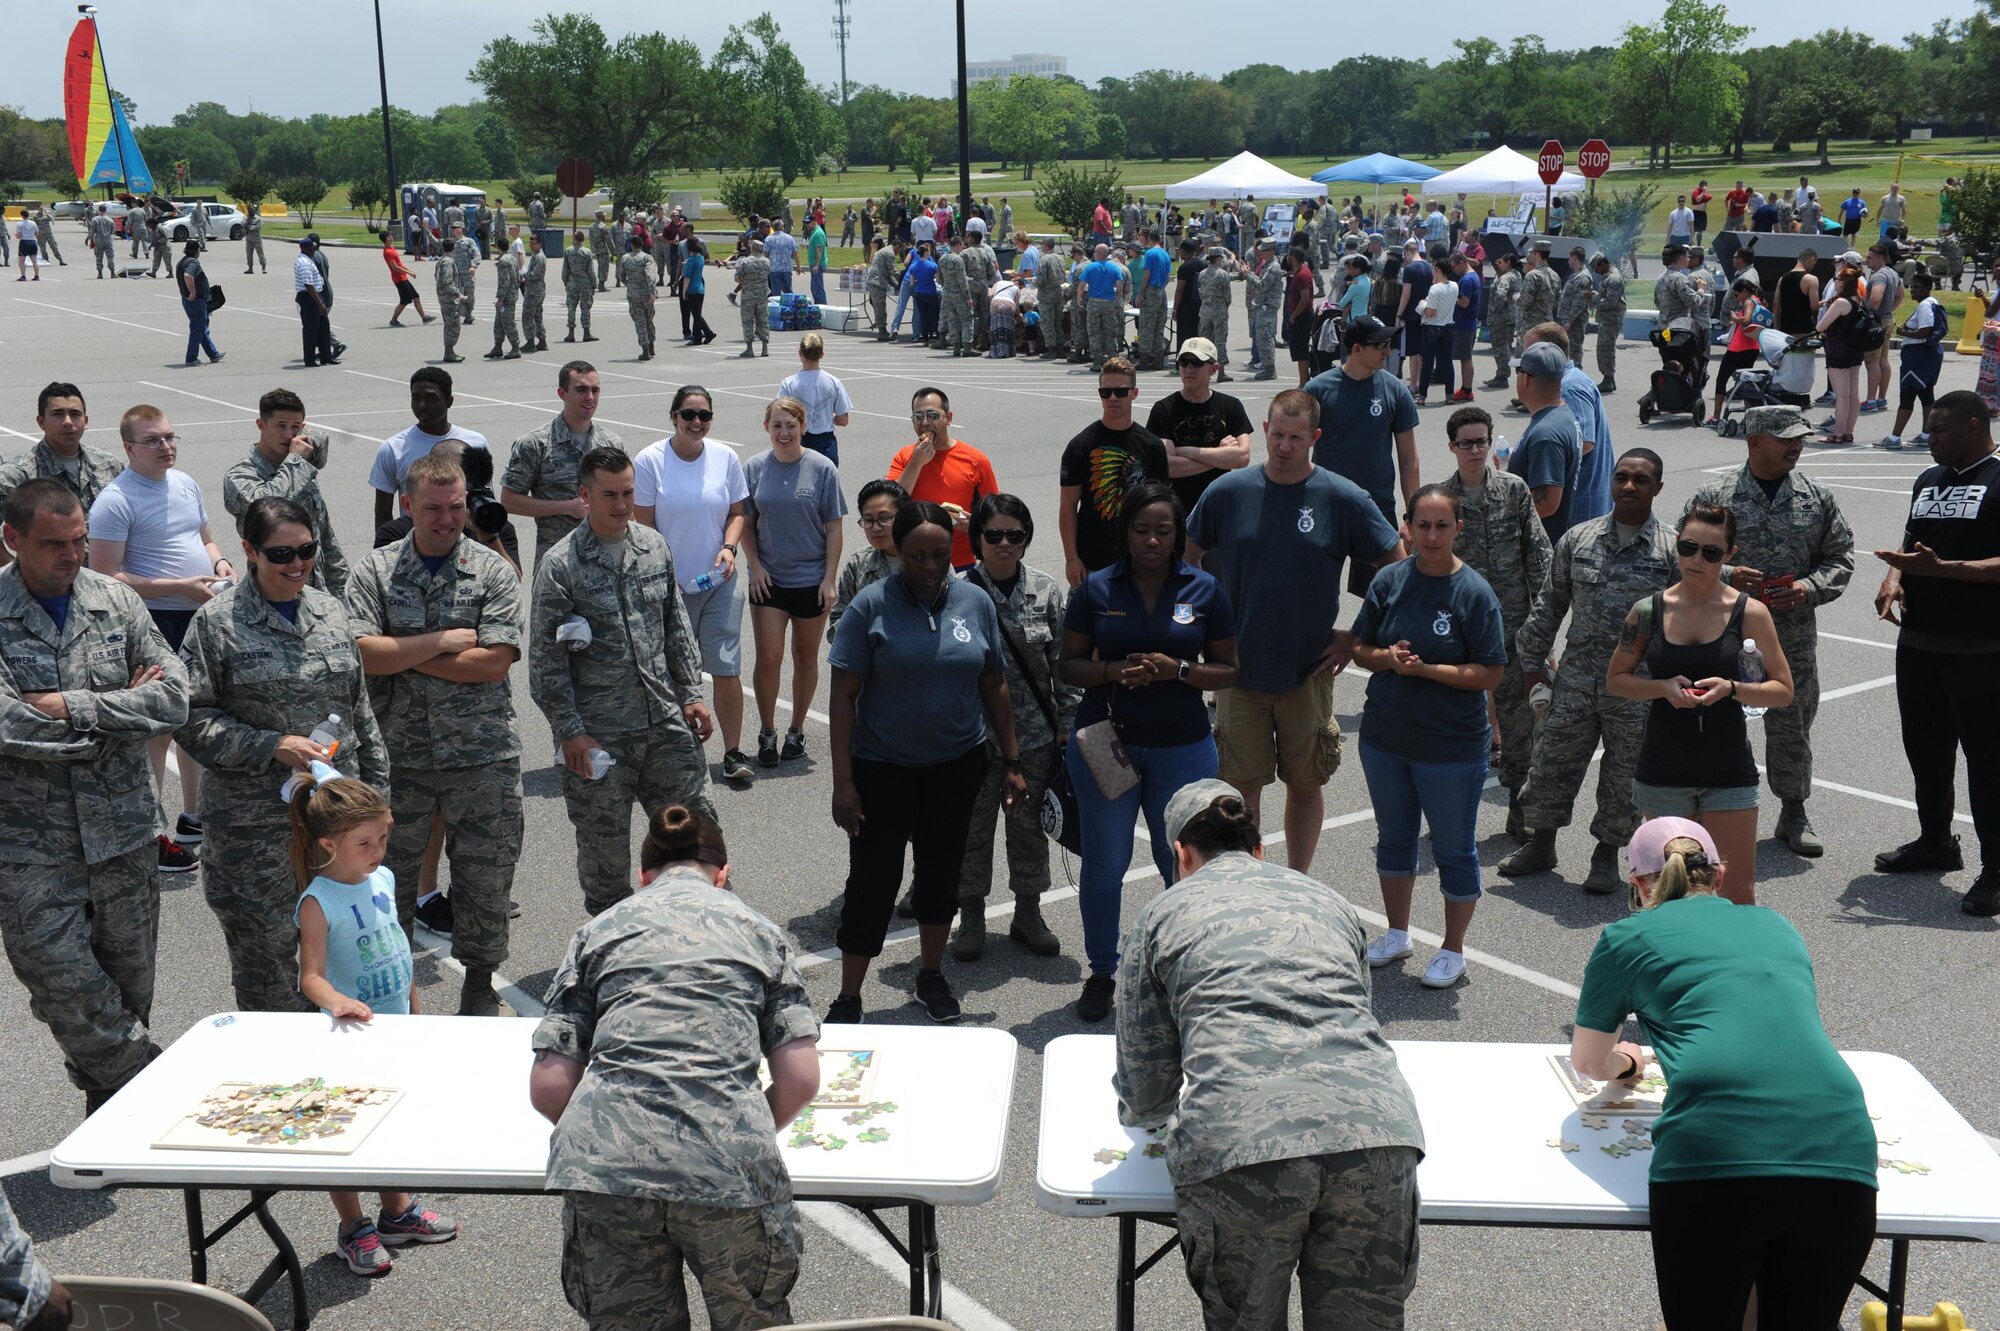 A crowd gathers to watch Airmen compete in the dragon puzzle competition during a burger burn April 29, 2016, Keesler Air Force Base, Miss. The burger burn was the final event of Wingman Week in support of Comprehensive Airman Fitness. (U.S. Air Force photo by Kemberly Groue)